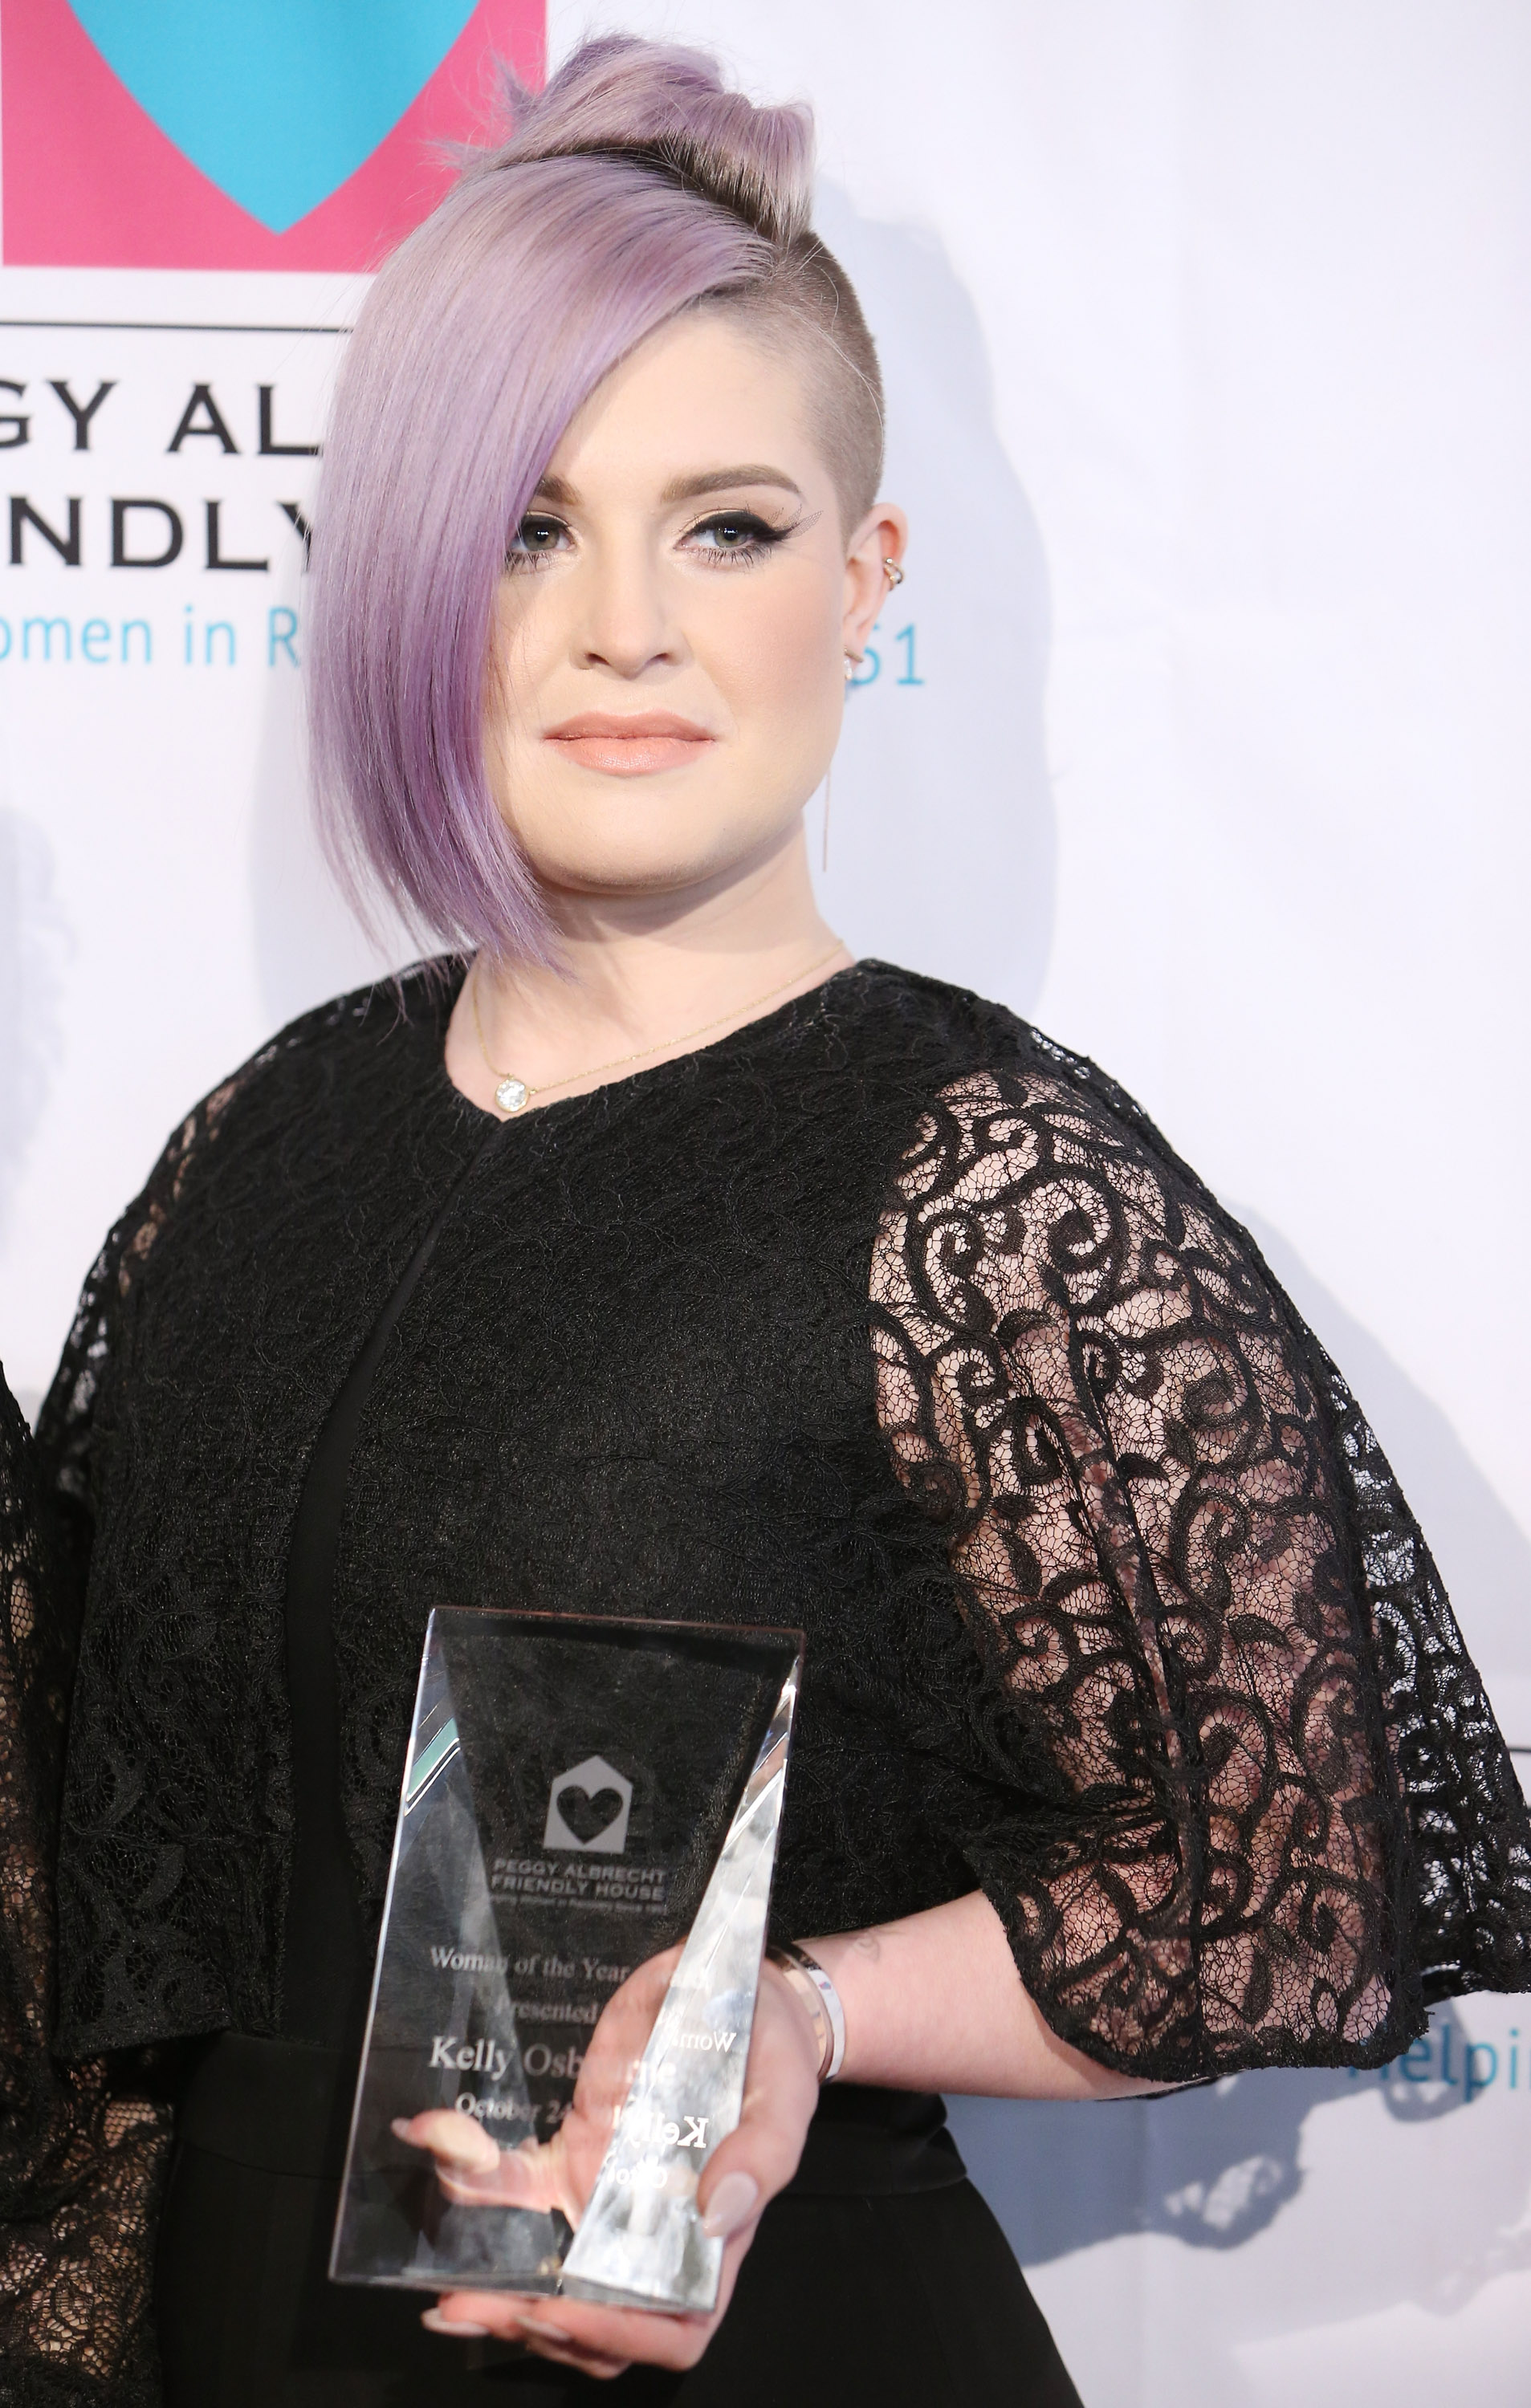 Kelly Osbourne arrives at The Peggy Albrecht Friendly House Los Angeles 26th Annual Awards luncheon held at The Beverly Hilton Hotel in Beverly Hills, California,  on October 24, 2015. | Source: Getty Images